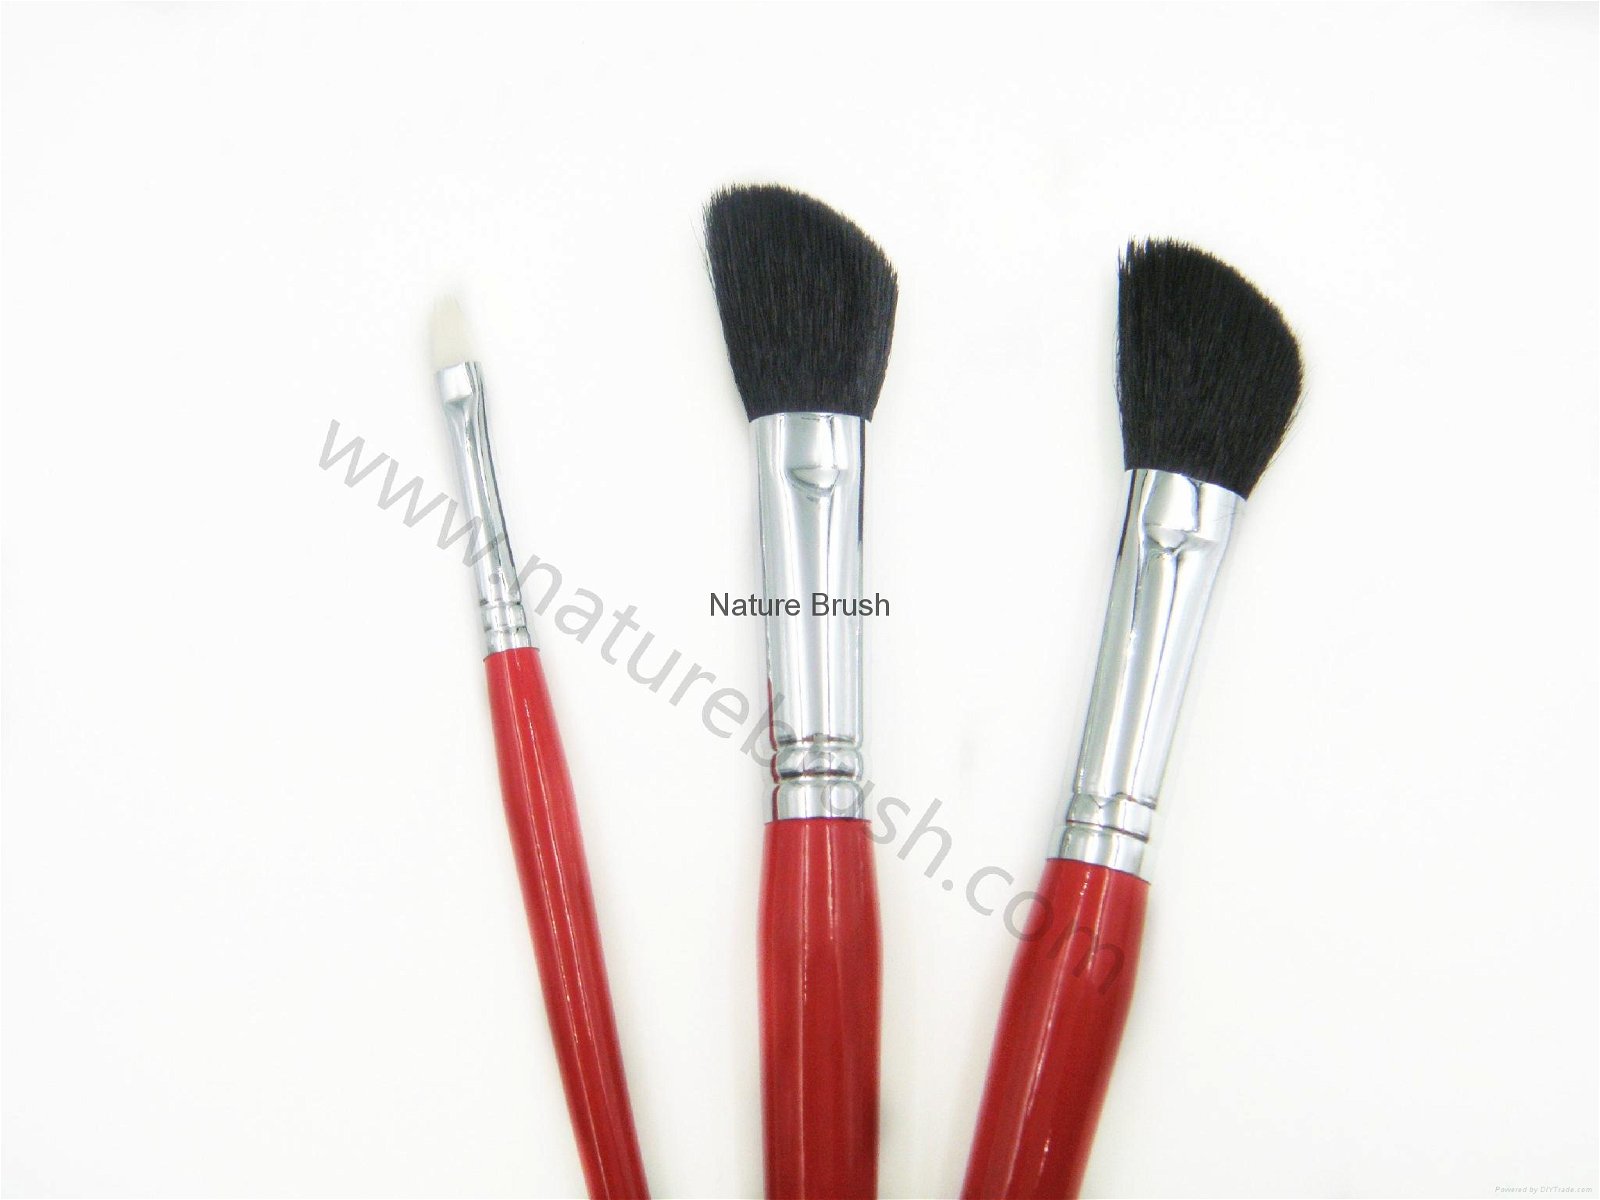 Makeup cosmetic brush tools sets from golden supplier Nature Brush